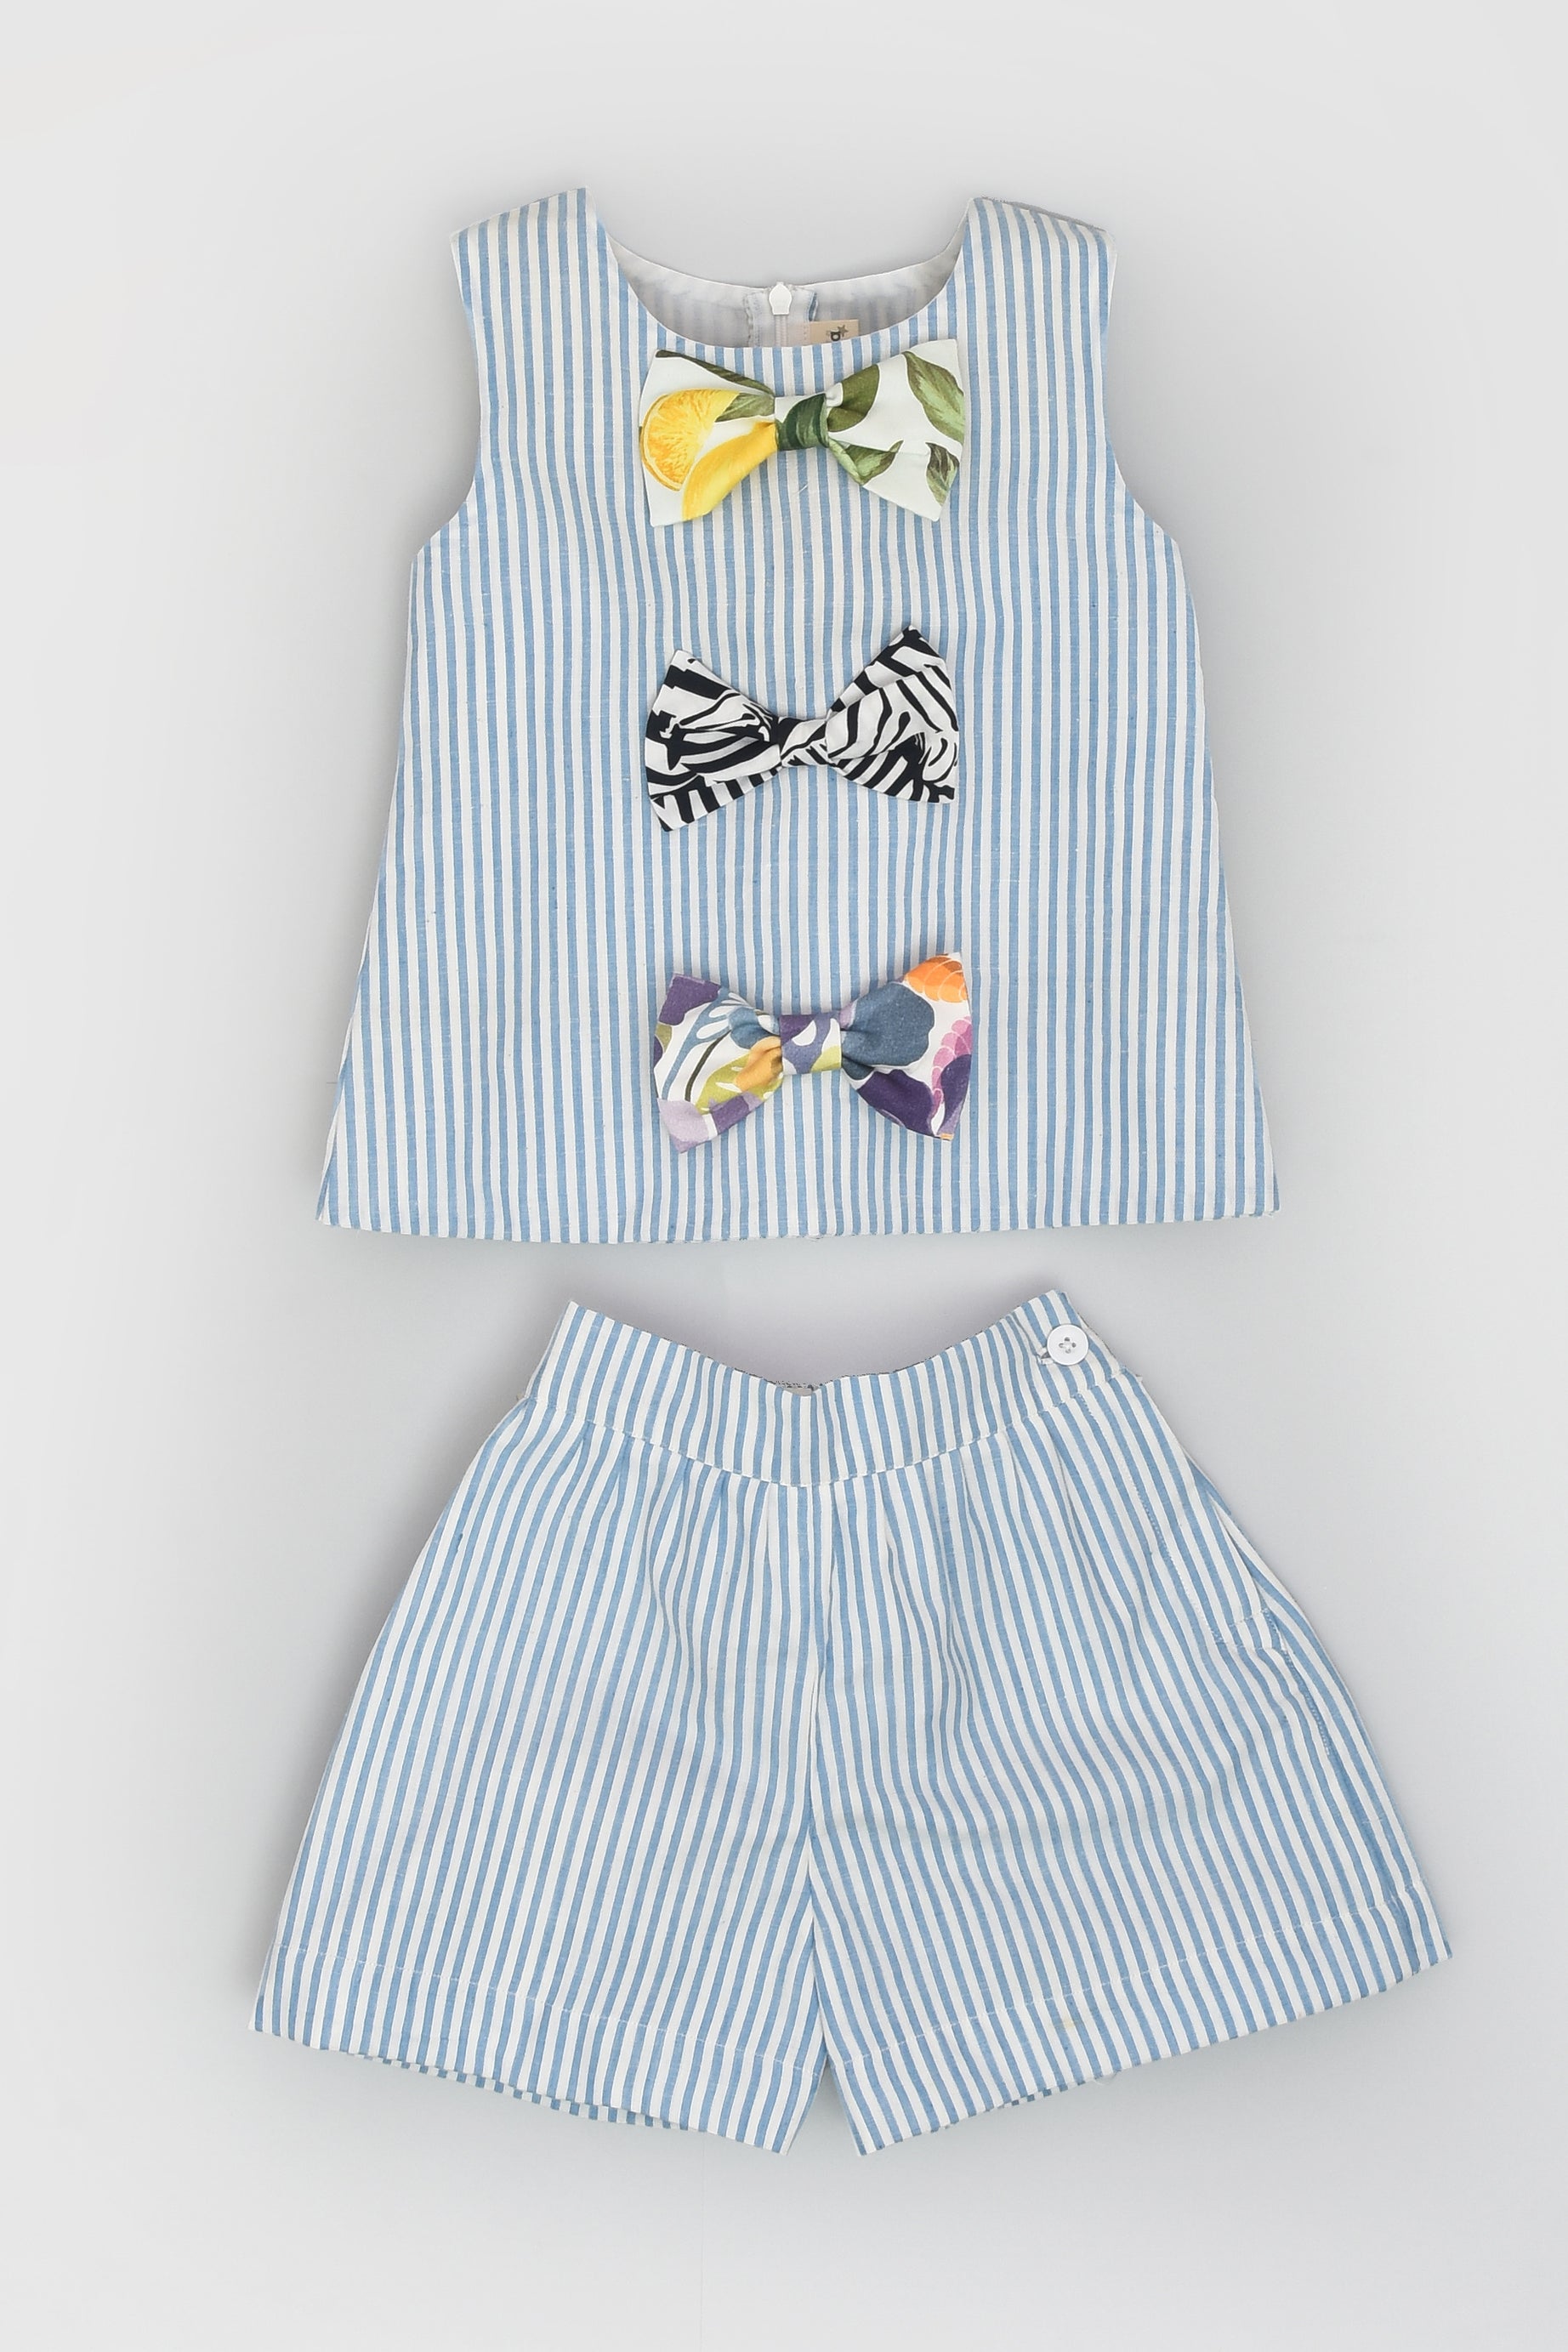 Blue Stripe Dress With 3 Bows & Shorts